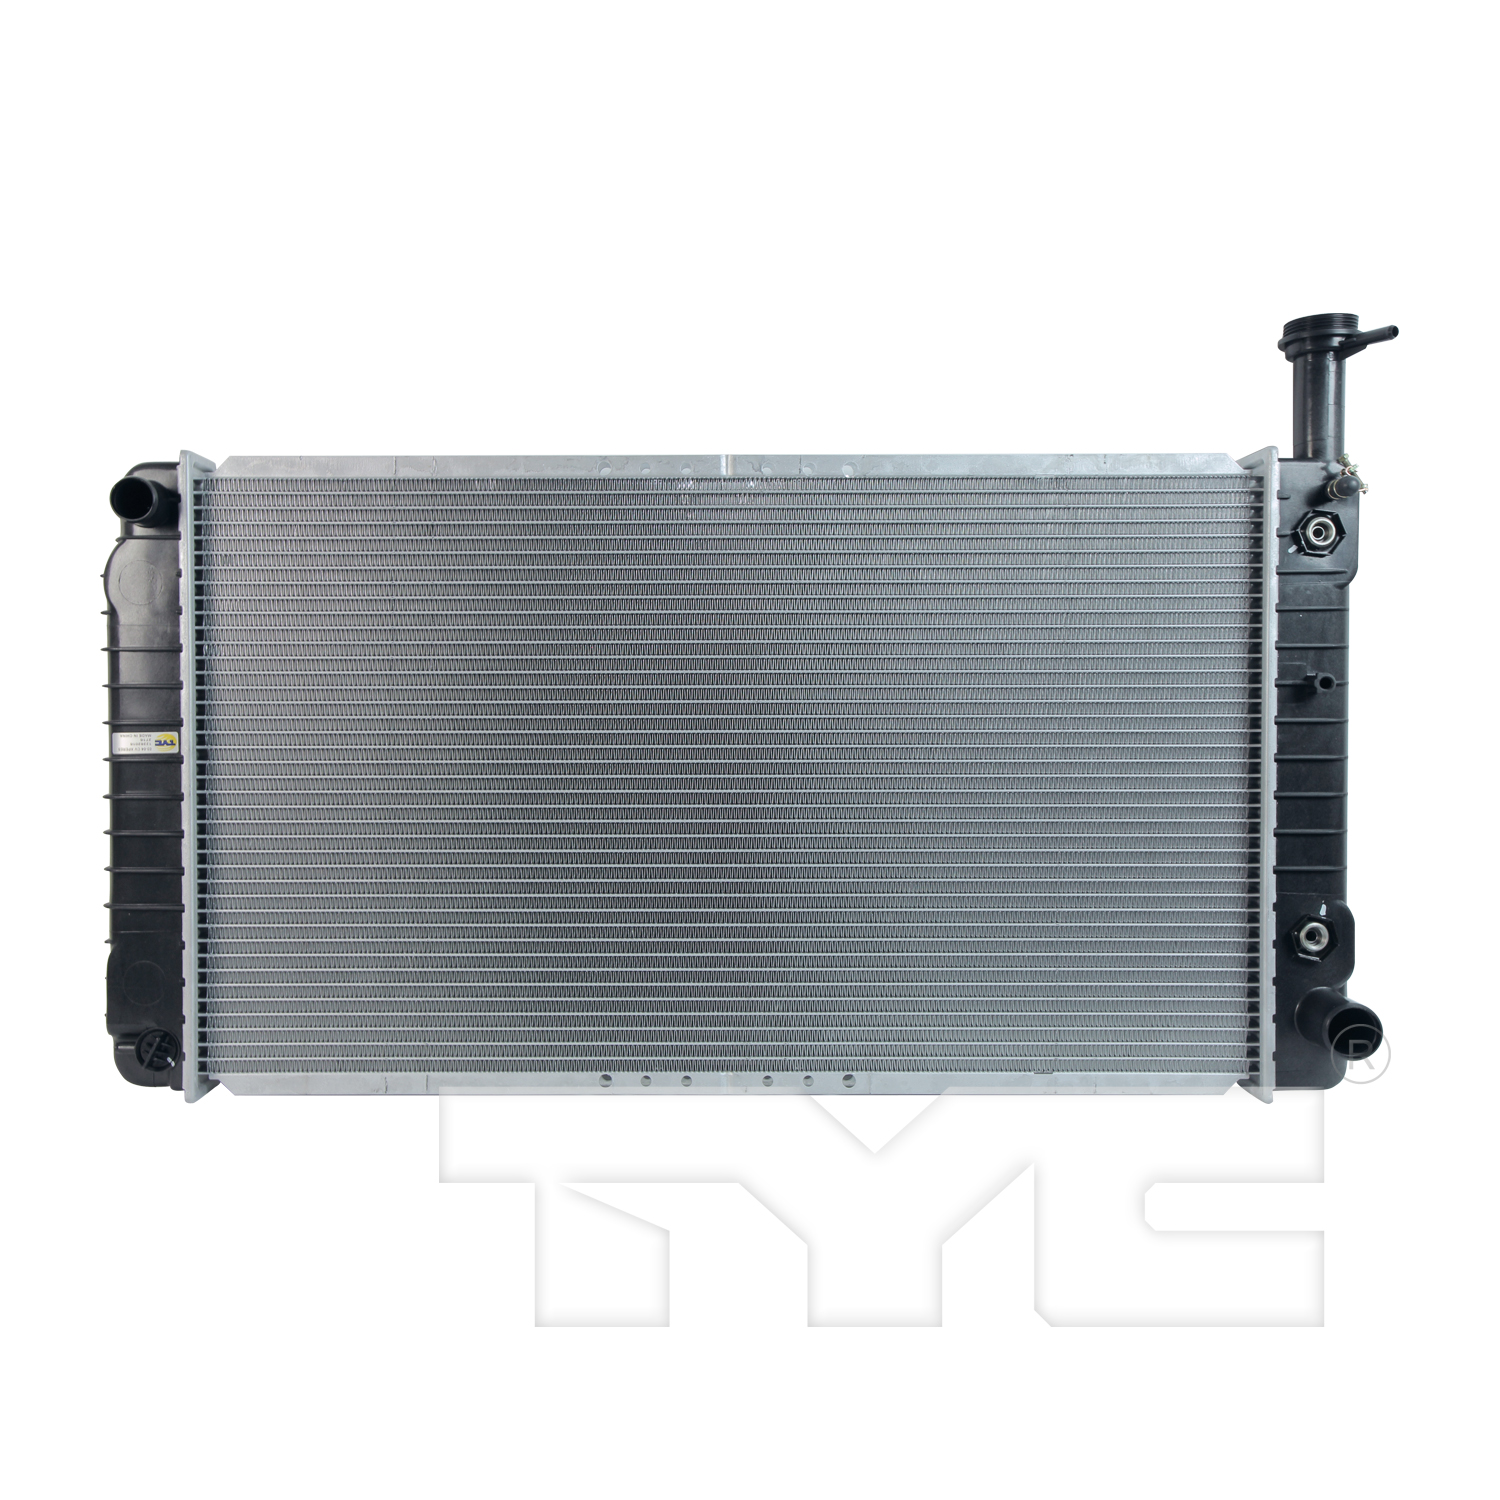 Aftermarket RADIATORS for CHEVROLET - EXPRESS 2500, EXPRESS 2500,03-04,Radiator assembly